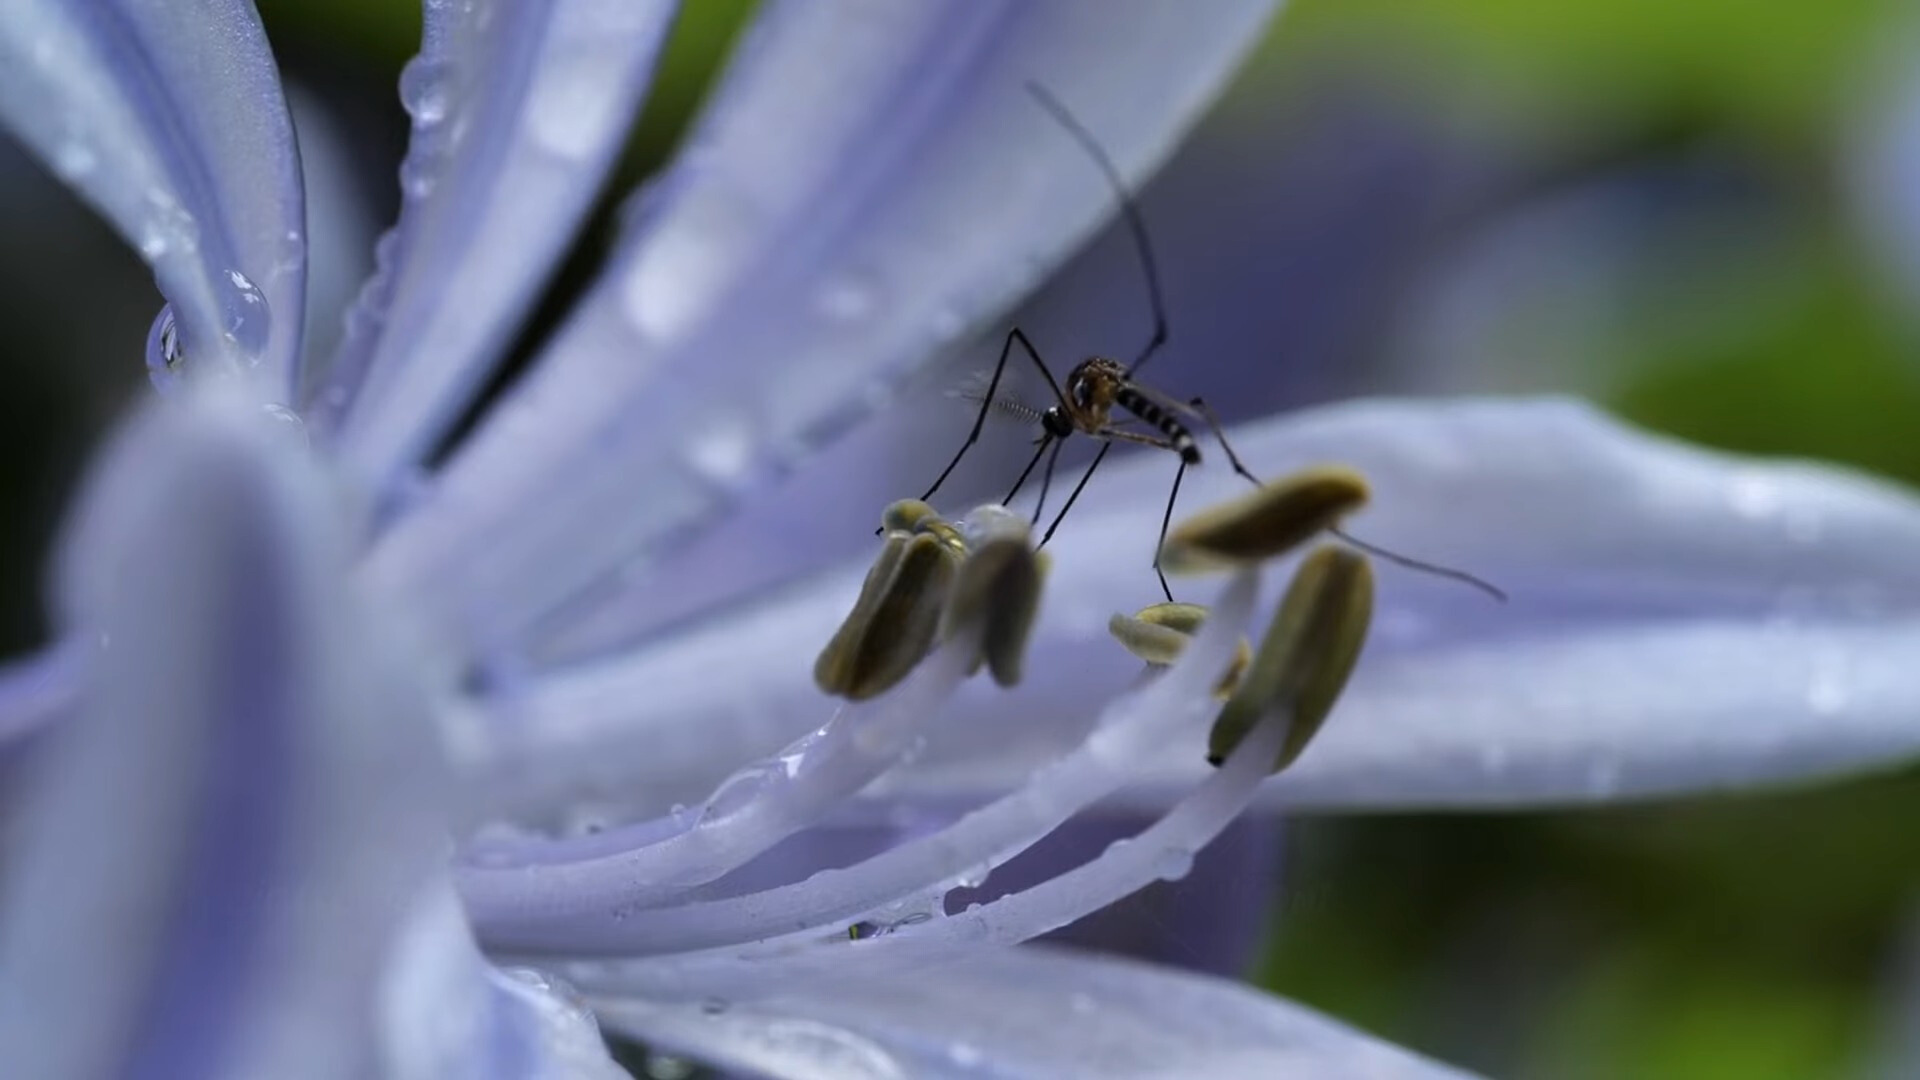 Mosquitoes play positive roles in pollination of orchids